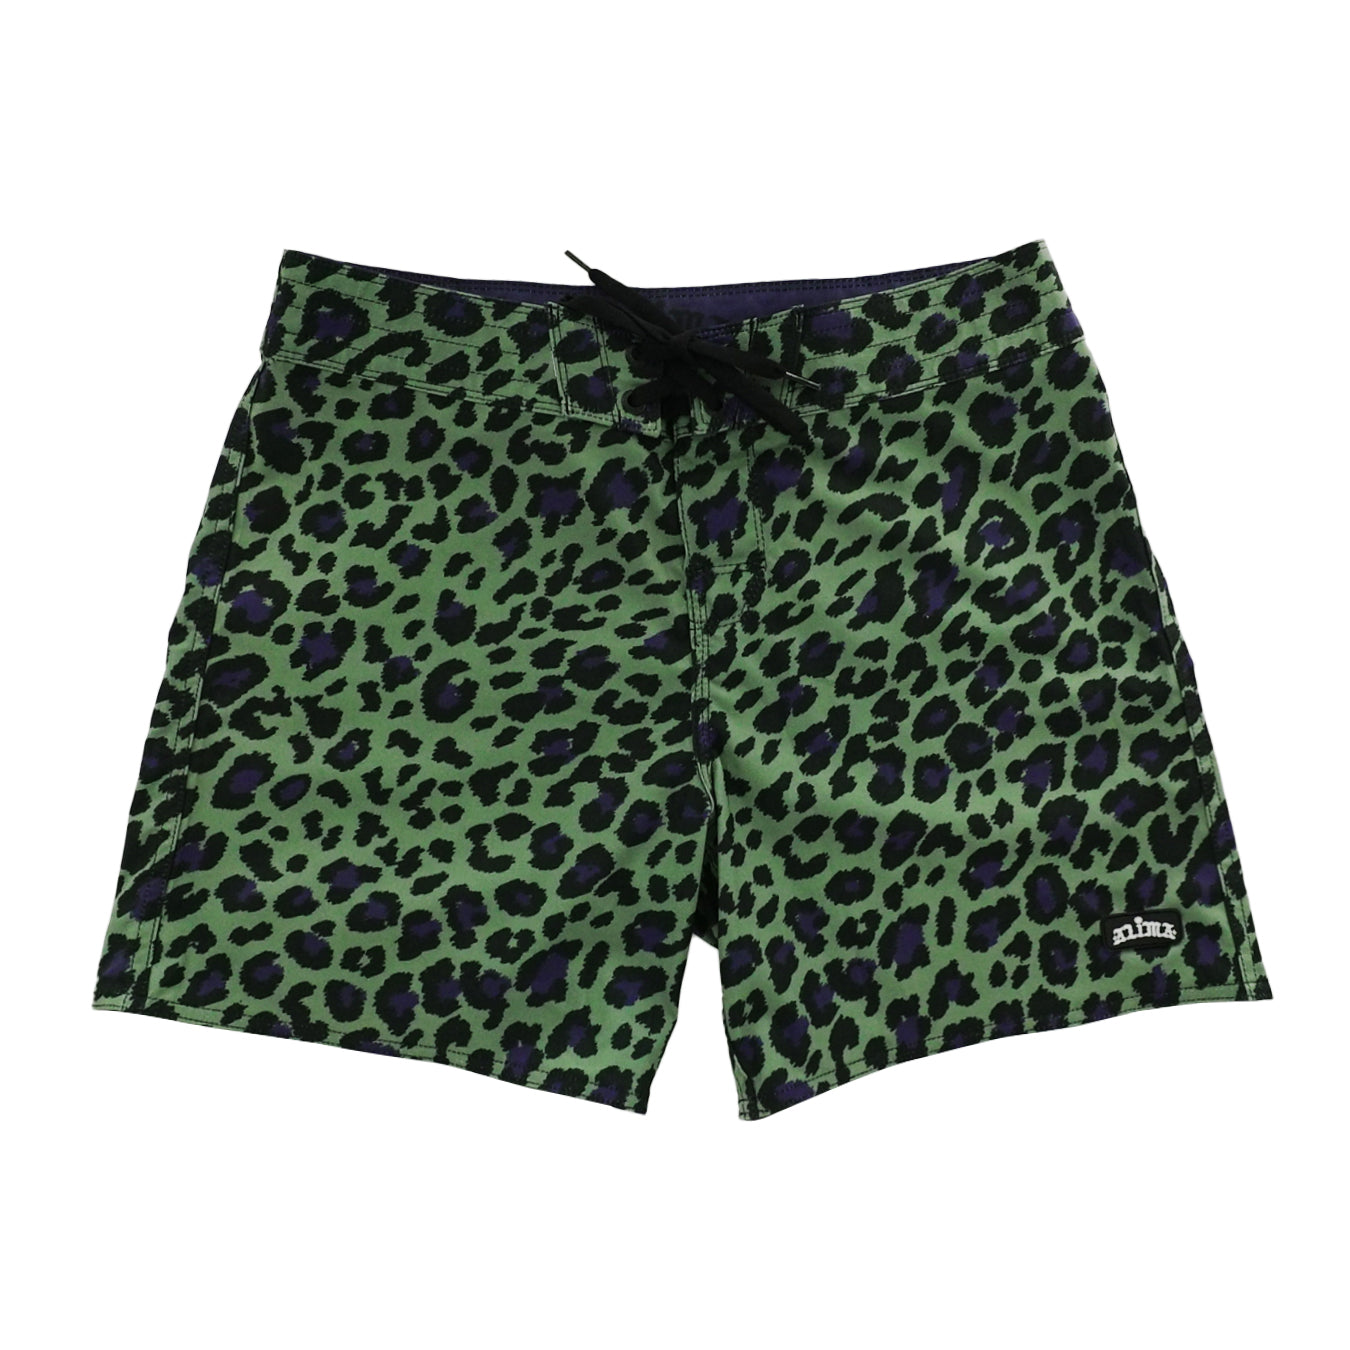 The Classic in Jade Leopard Color Way Boardshorts